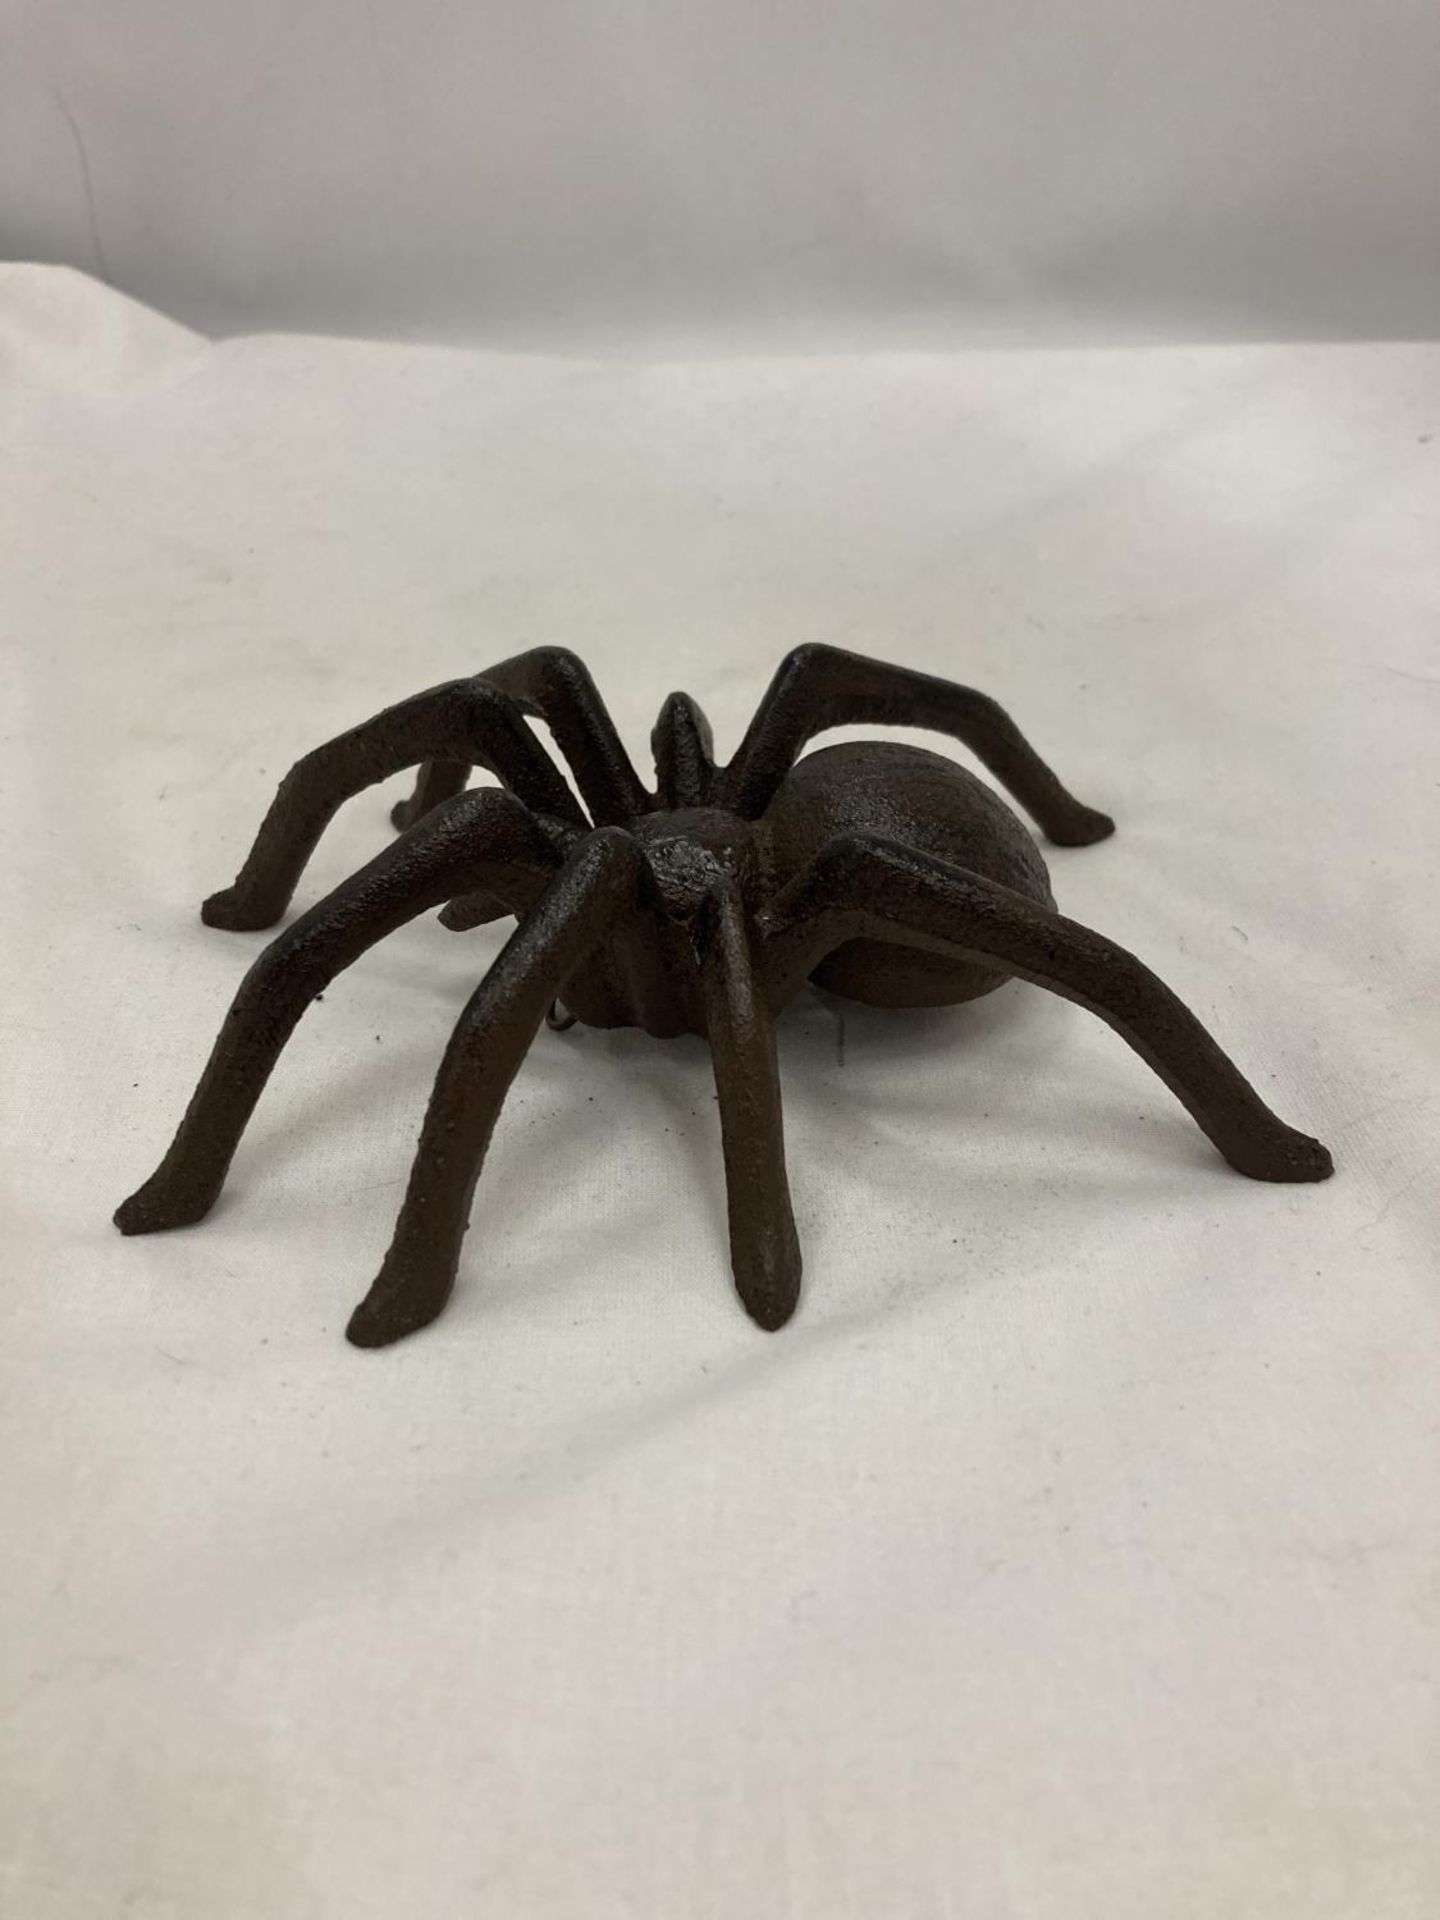 A CAST METAL MODEL OF A SPIDER - Image 5 of 5